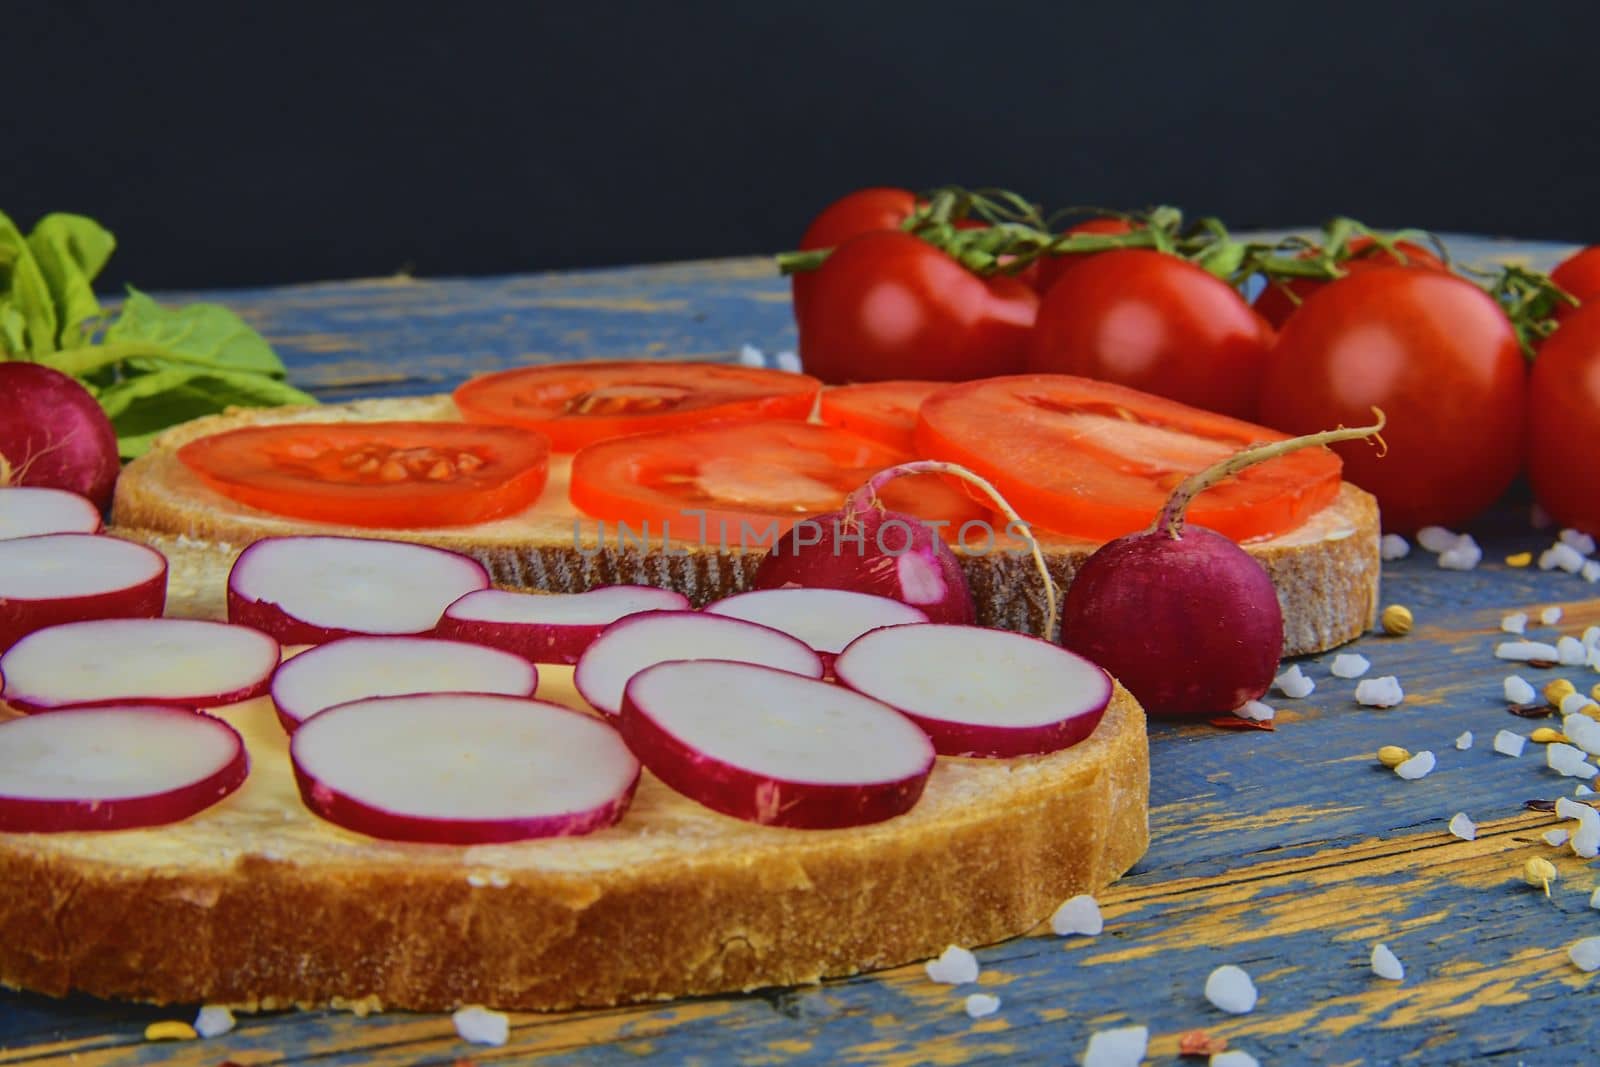 Spread butter on bread with sliced tomatoes and radishes. Fresh snack on natural wooden background.